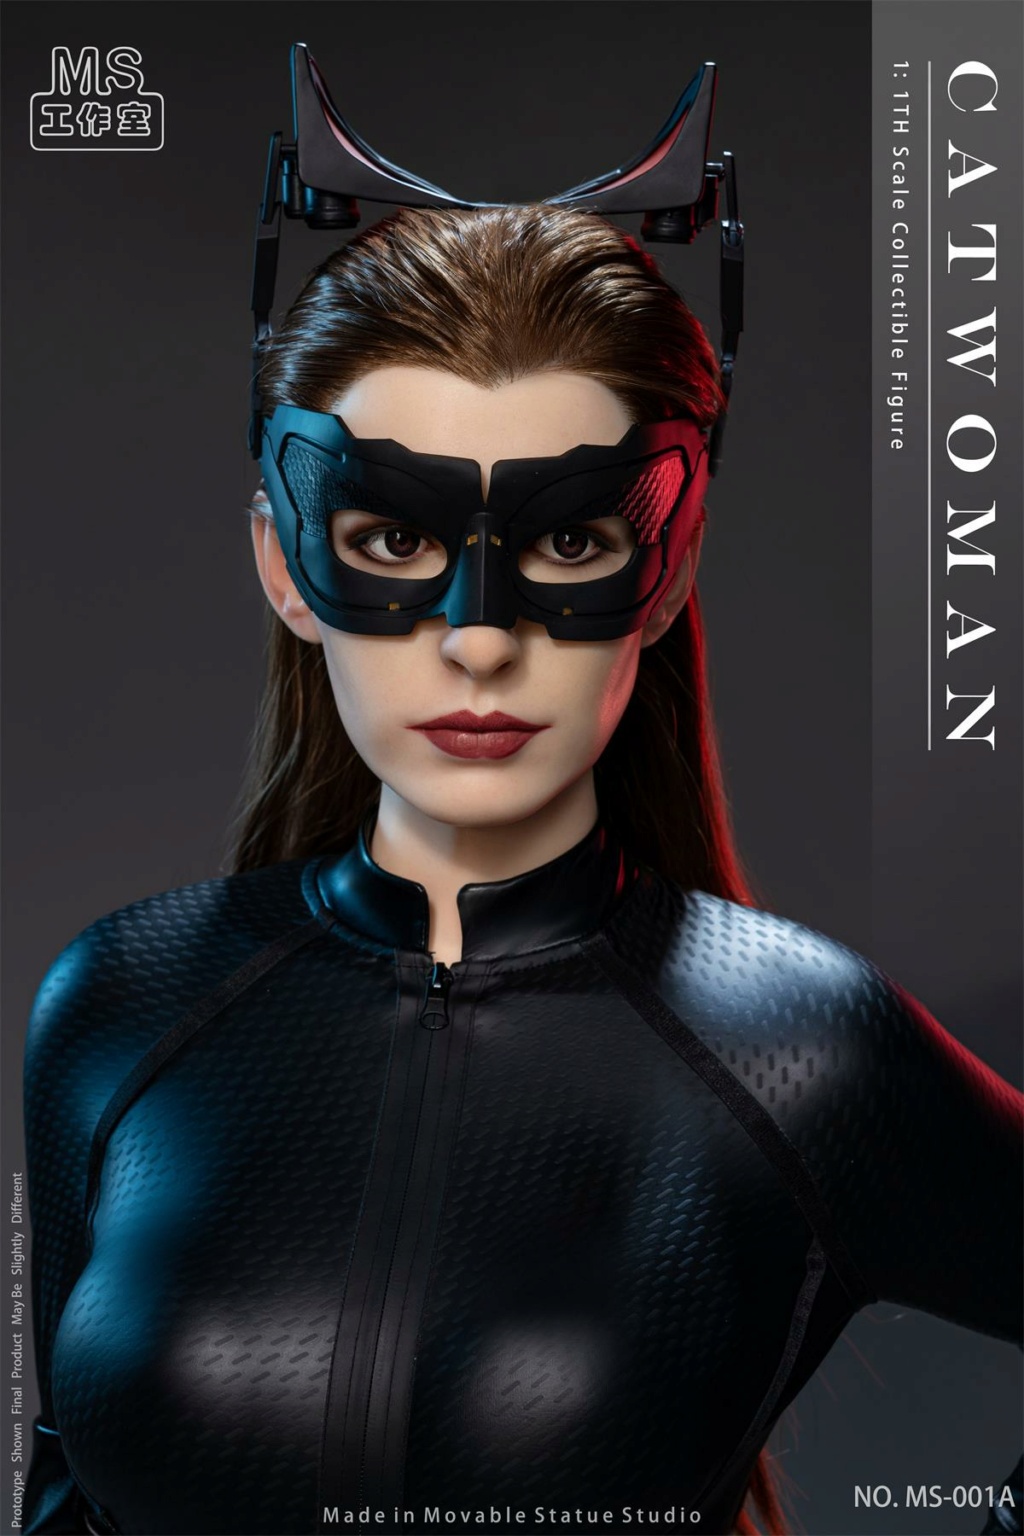 Female - NEW PRODUCT: MS Studio: Catwoman Movie Version 1/1 Proportion Catwoman Cherished Movable Figure “ Grand ” Age MS-001A 2182